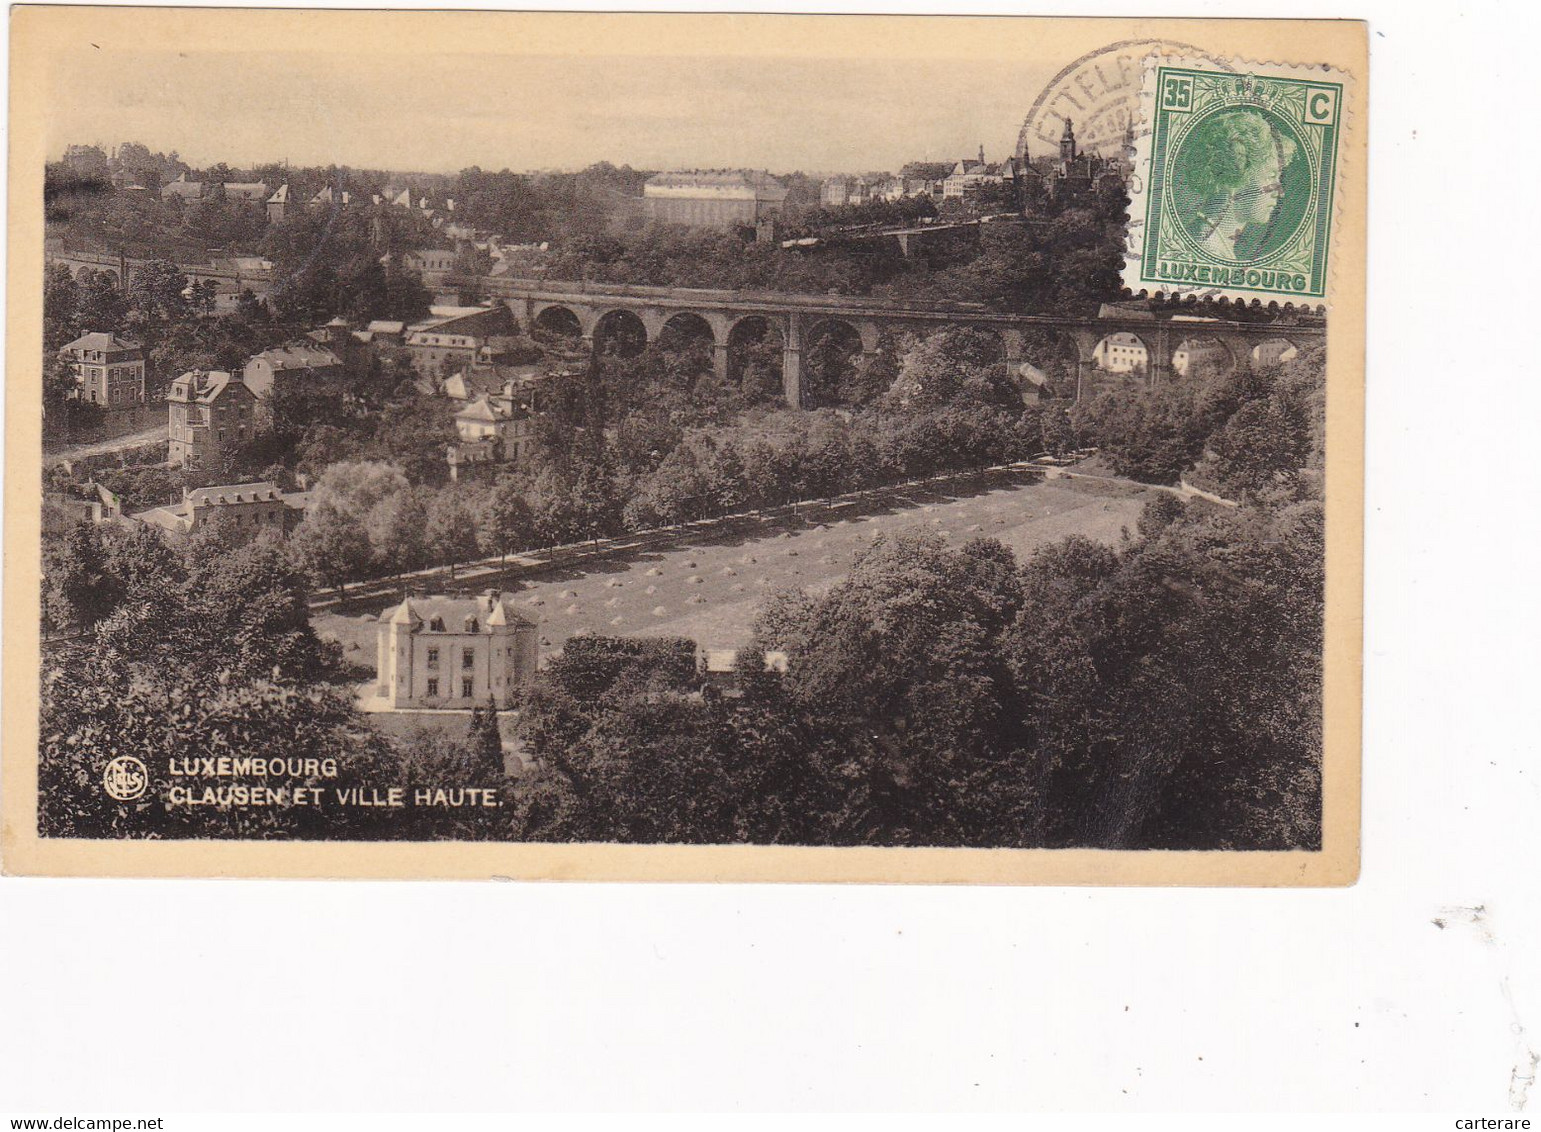 LUXEMBOURG,1932 - Luxemburg - Town